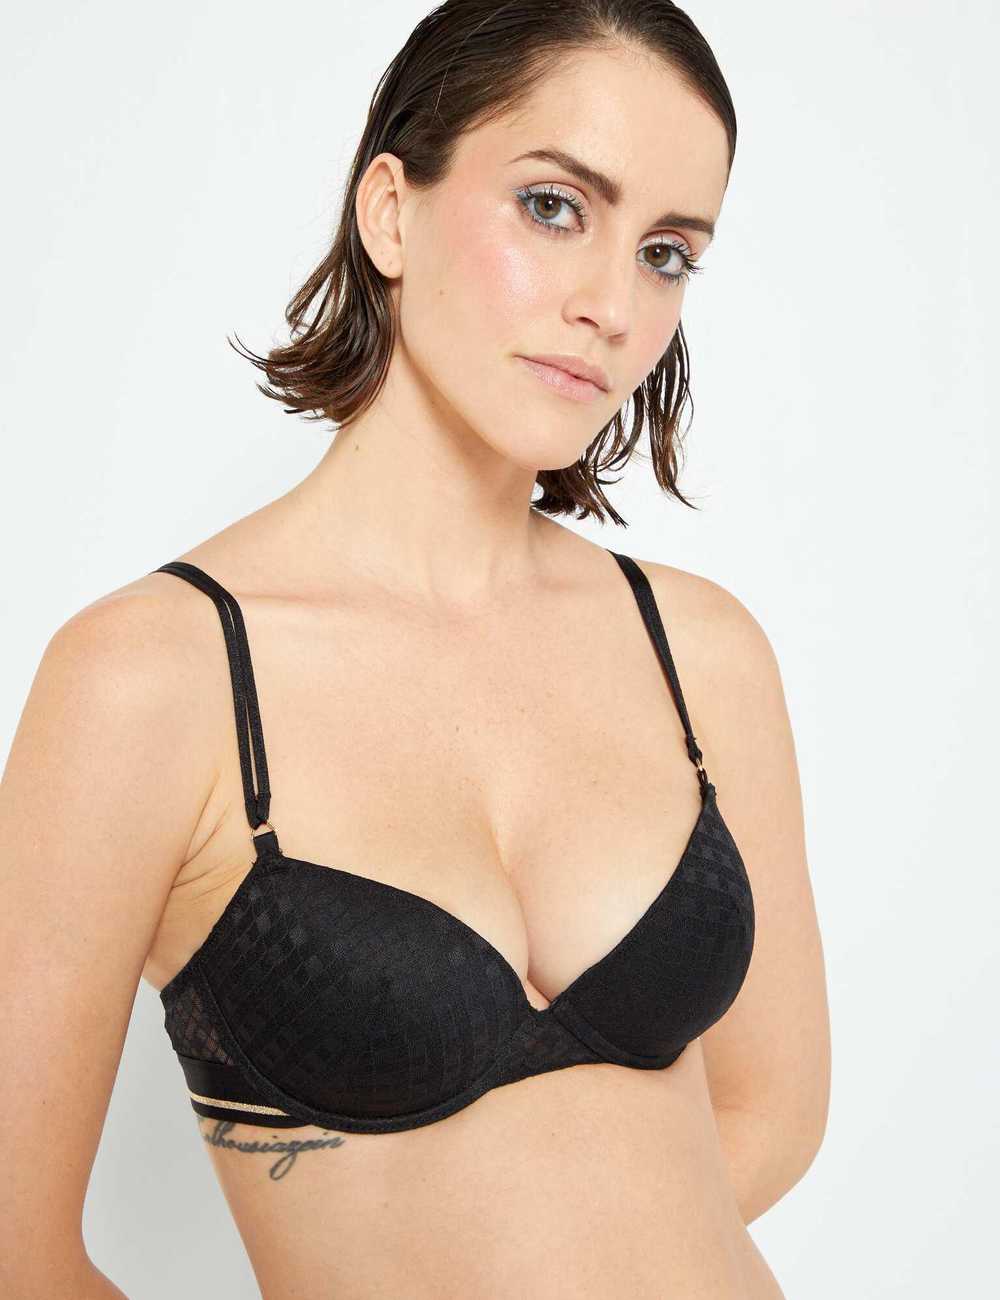 Buy Push-up bra with removable padding Online in Dubai & the UAE